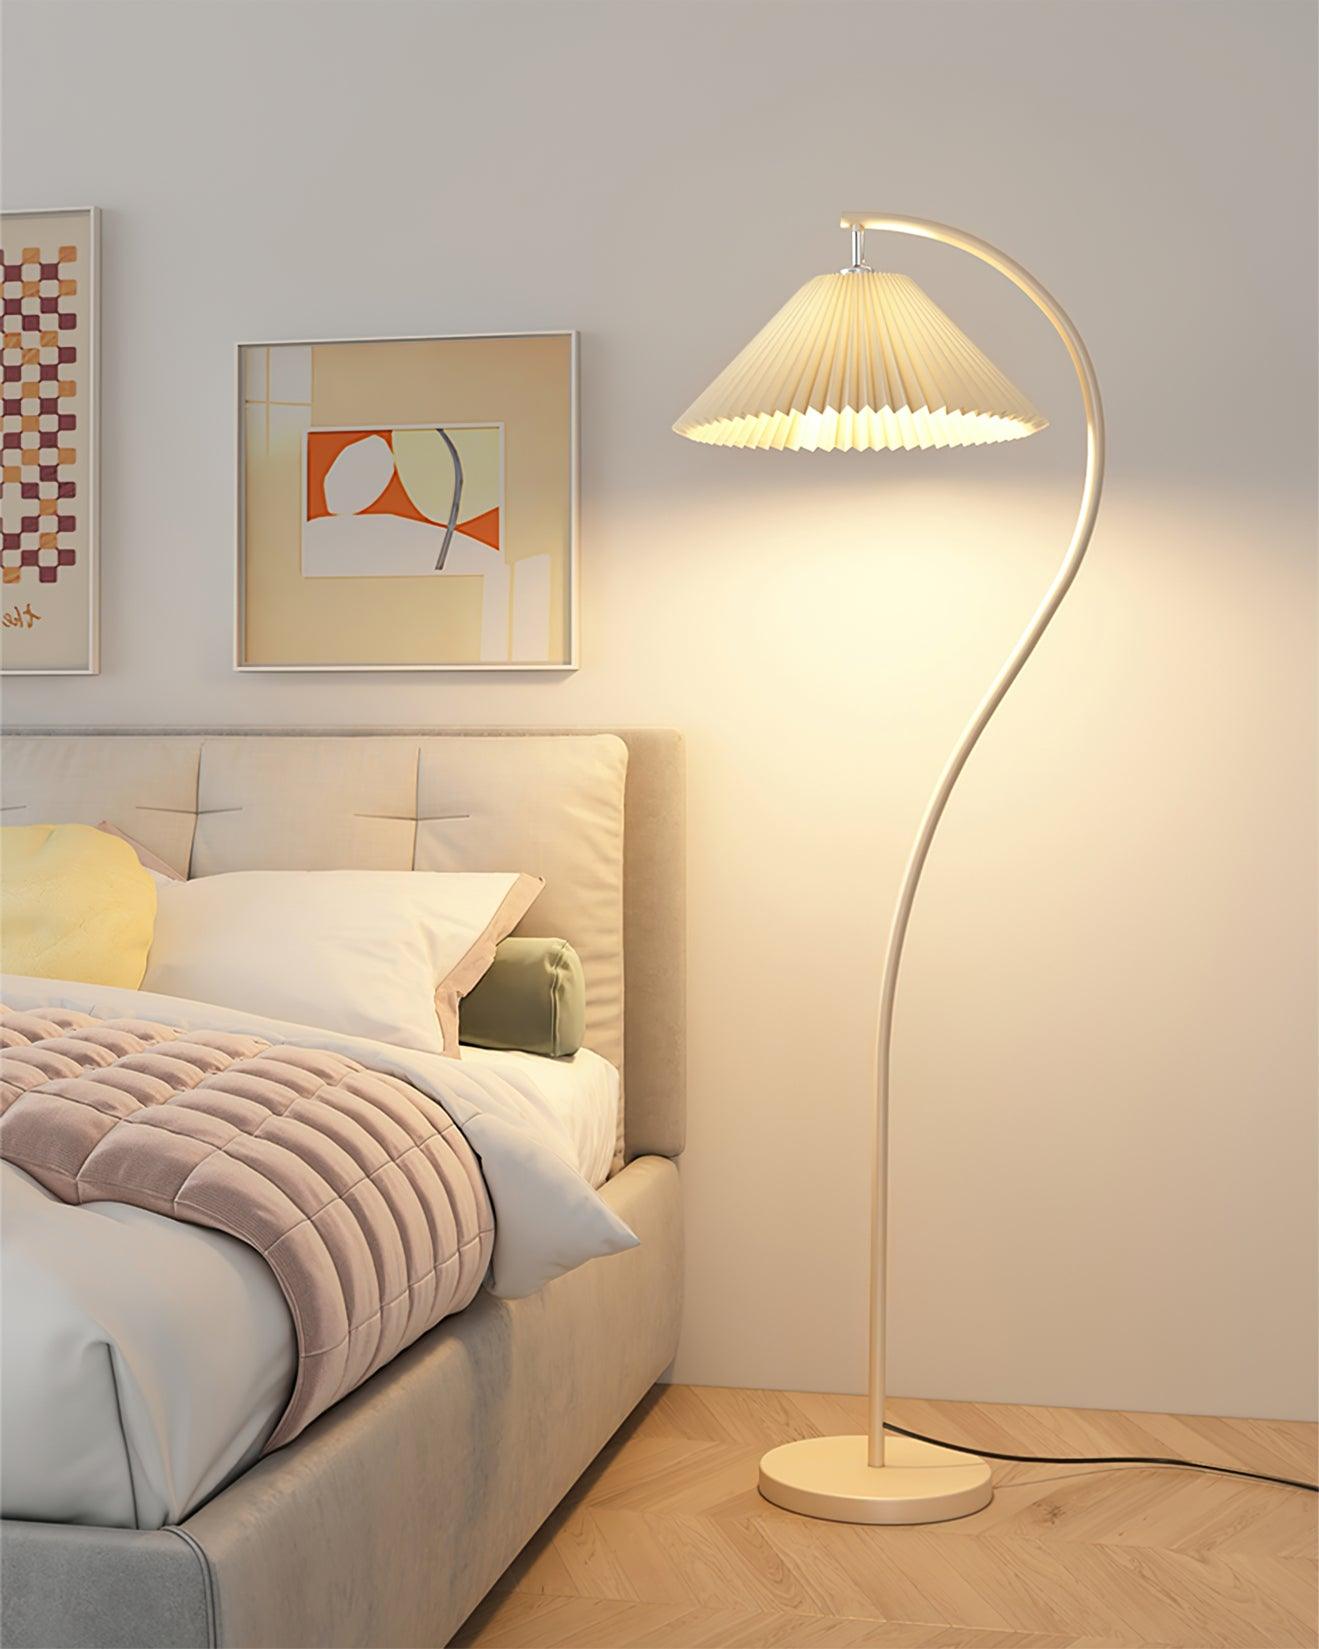 Arched Floor Lamp